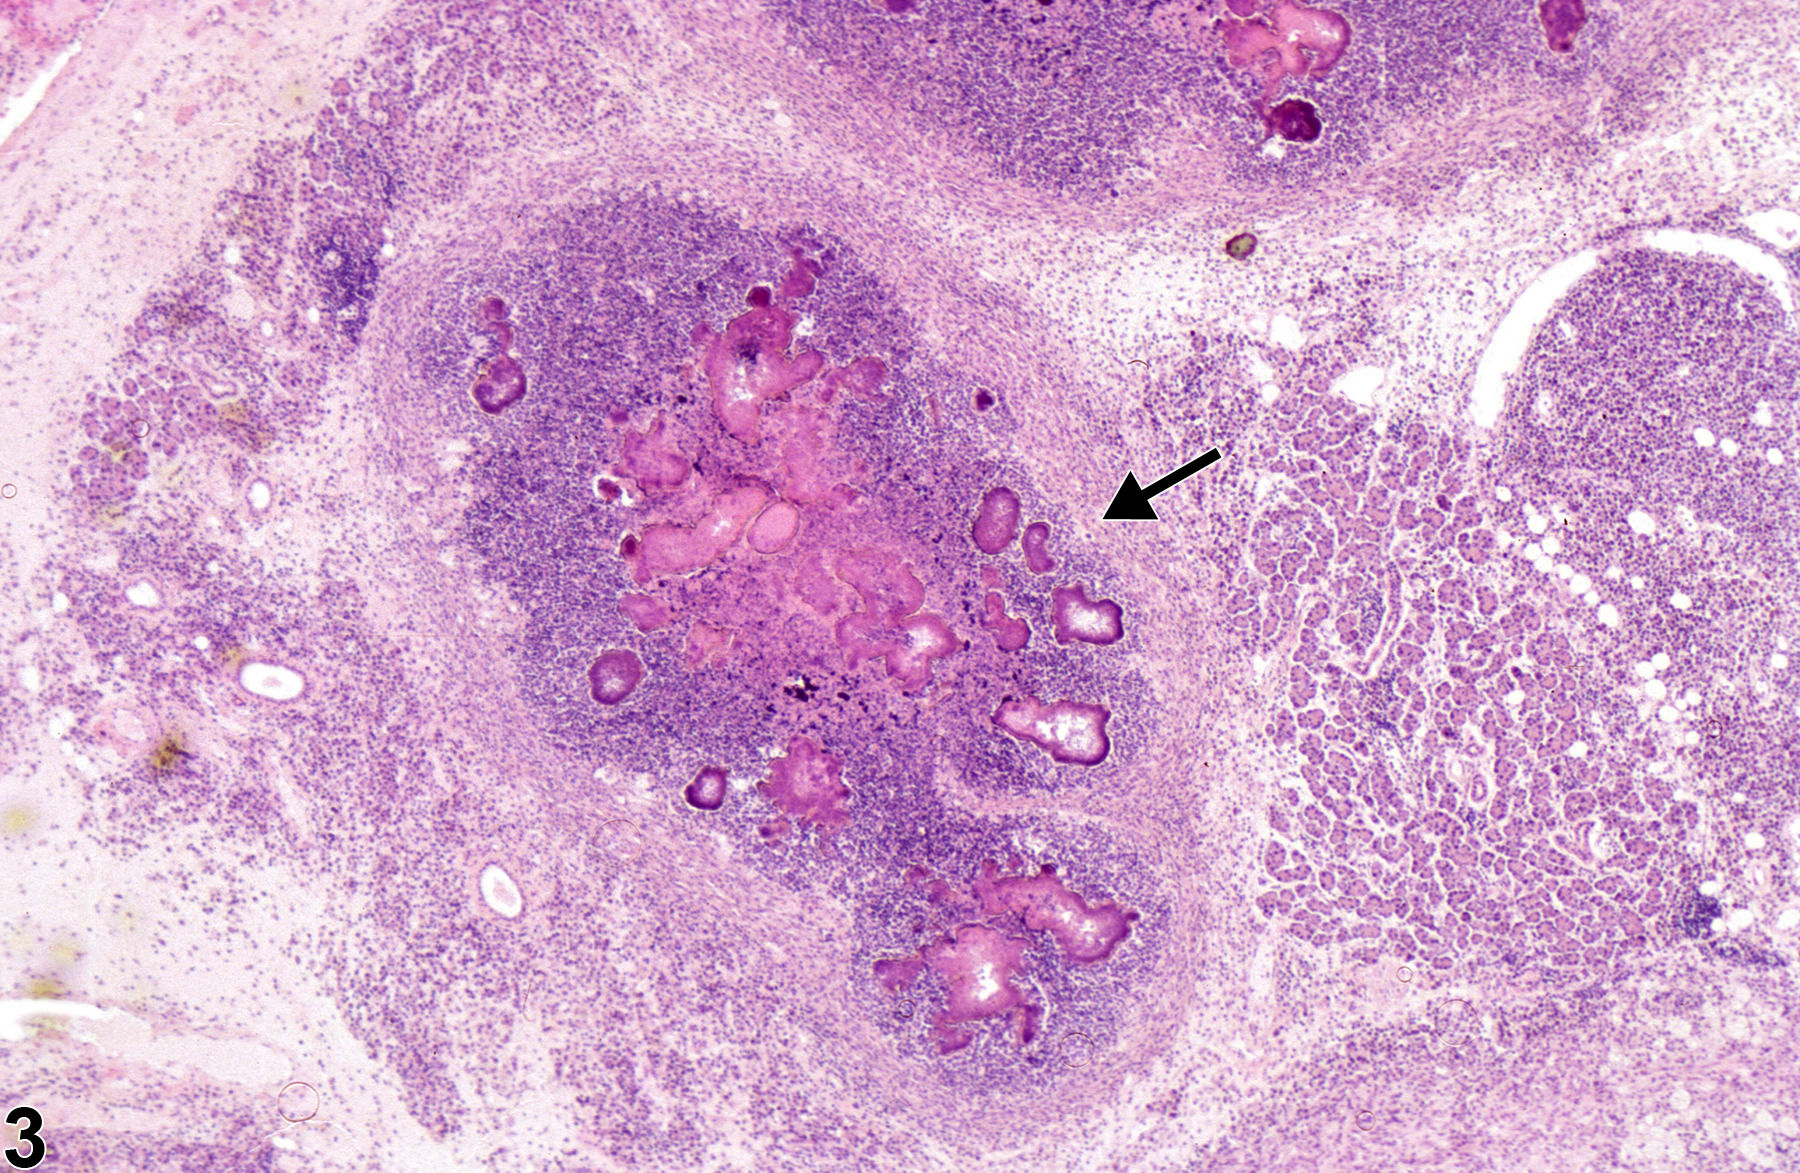 Image of inflammation in the salivary gland from a female B6C3F1 mouse in a chronic study